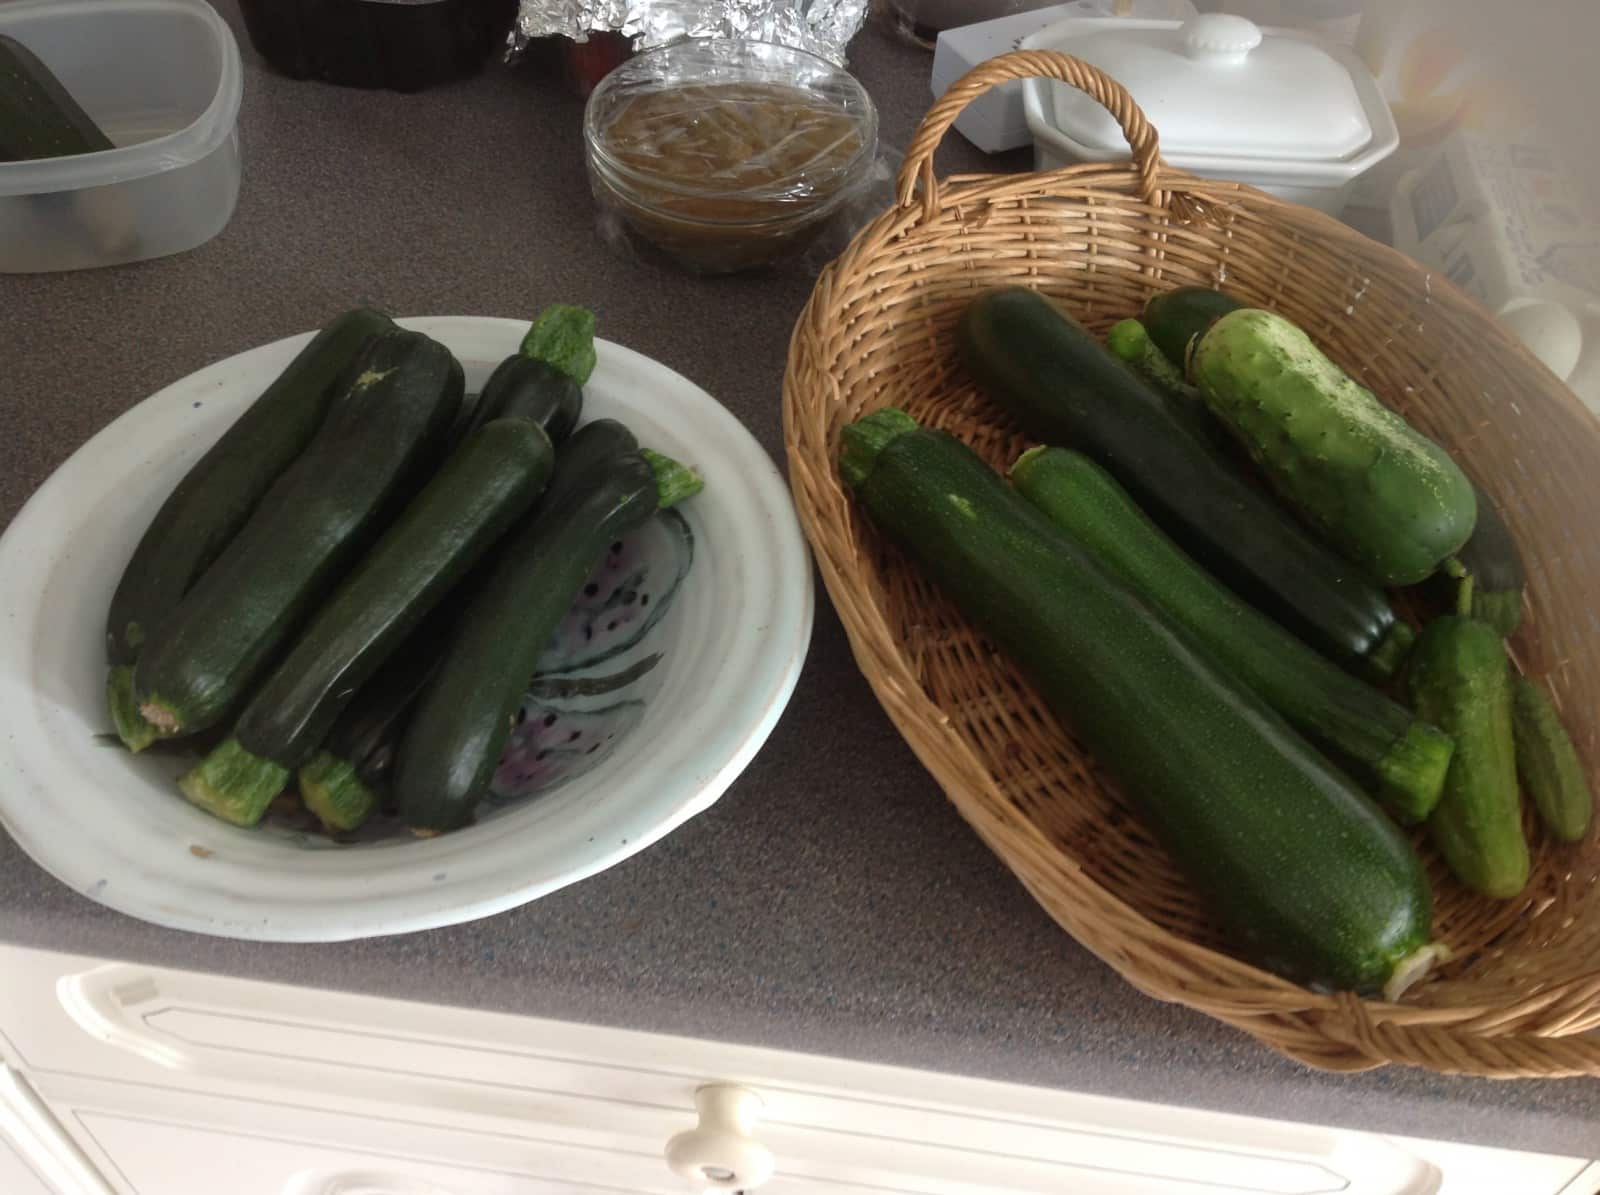 The courgette harvest today. A dish and a basket of courgettes.